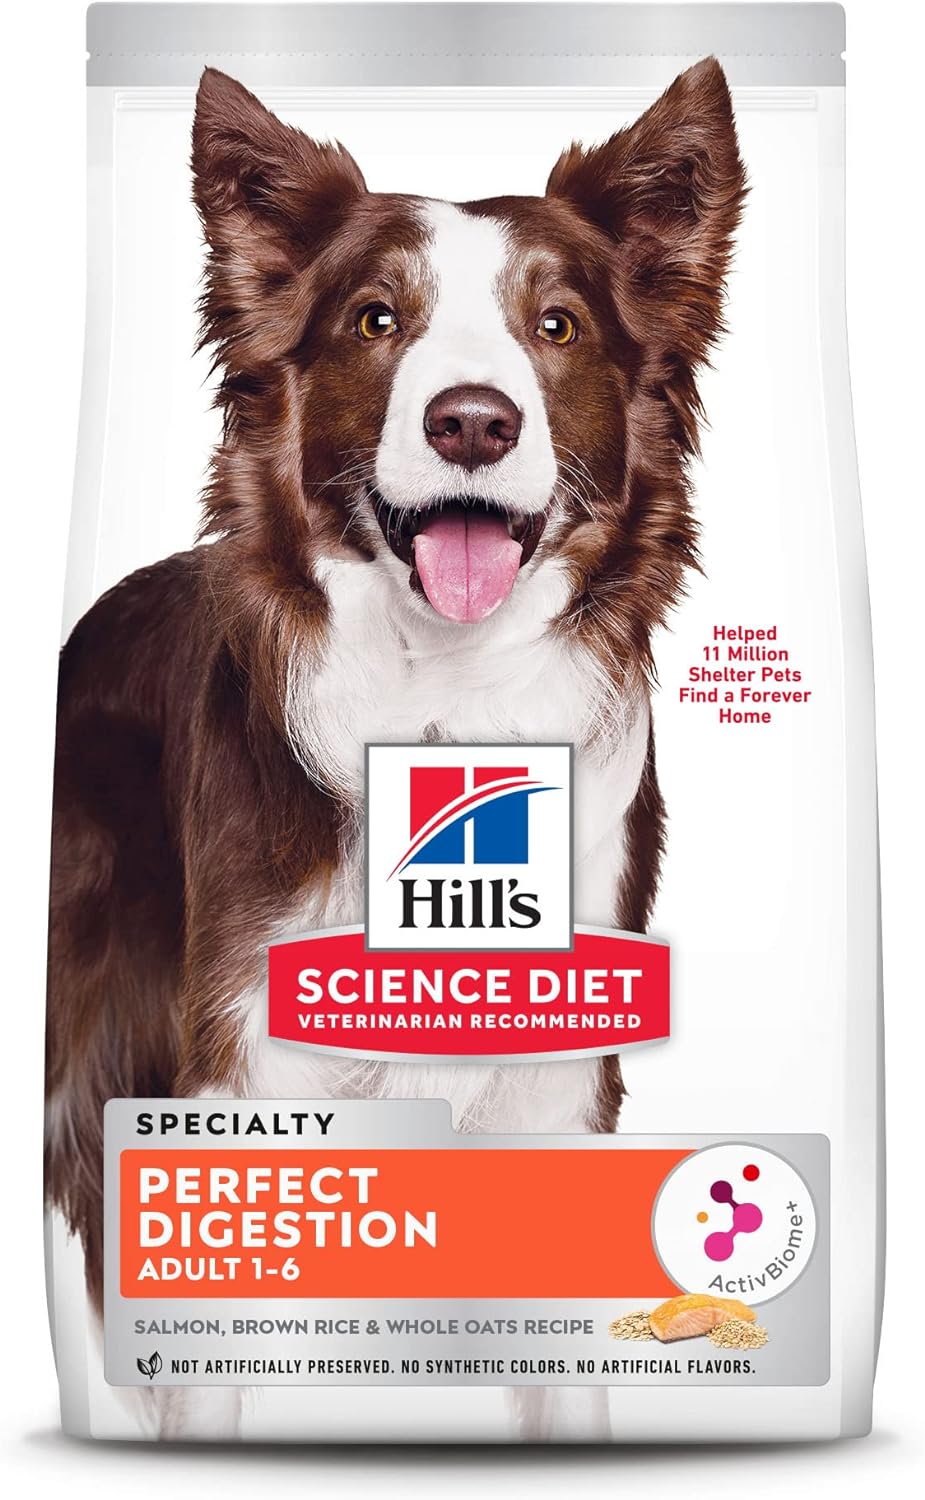 Hill’s Science Diet Adult Perfect Digestion Salmon, Whole Oats, and Brown Rice Recipe Dry Dog Food – Gallery Image 1